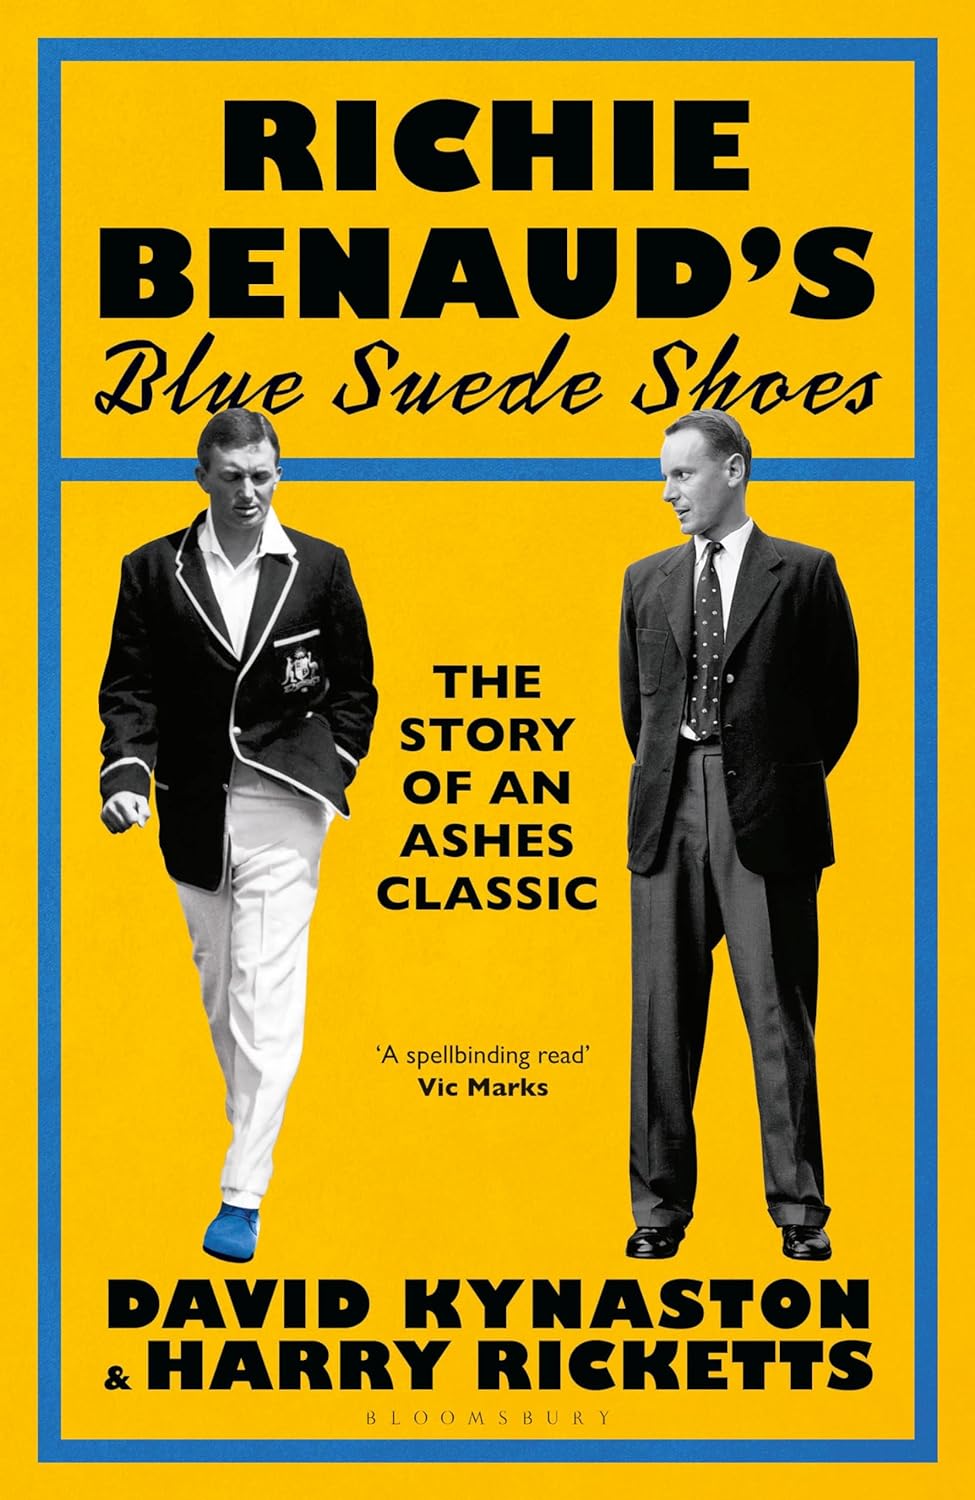 Richie_Benauds_Blue_Suede_Shoes_book_cover